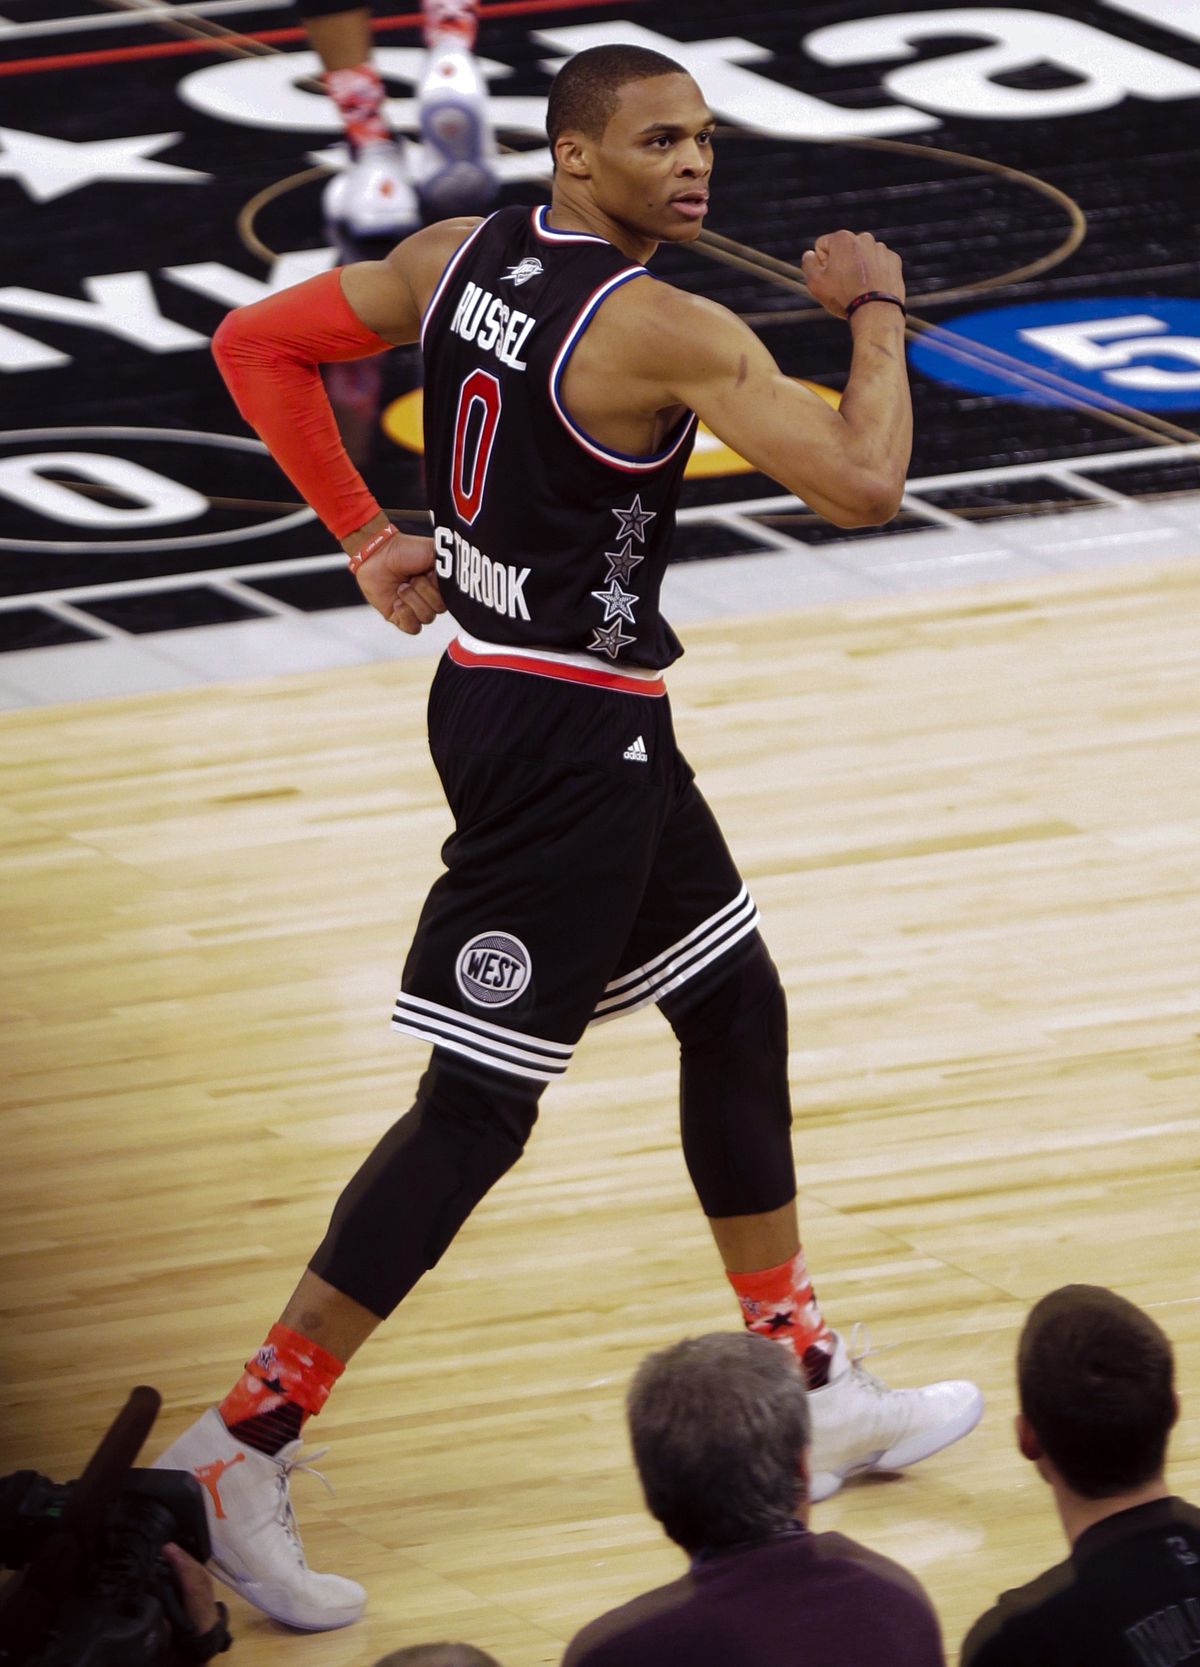 2015 NBA All-Star Game -- Russell Westbrook scores 41 points